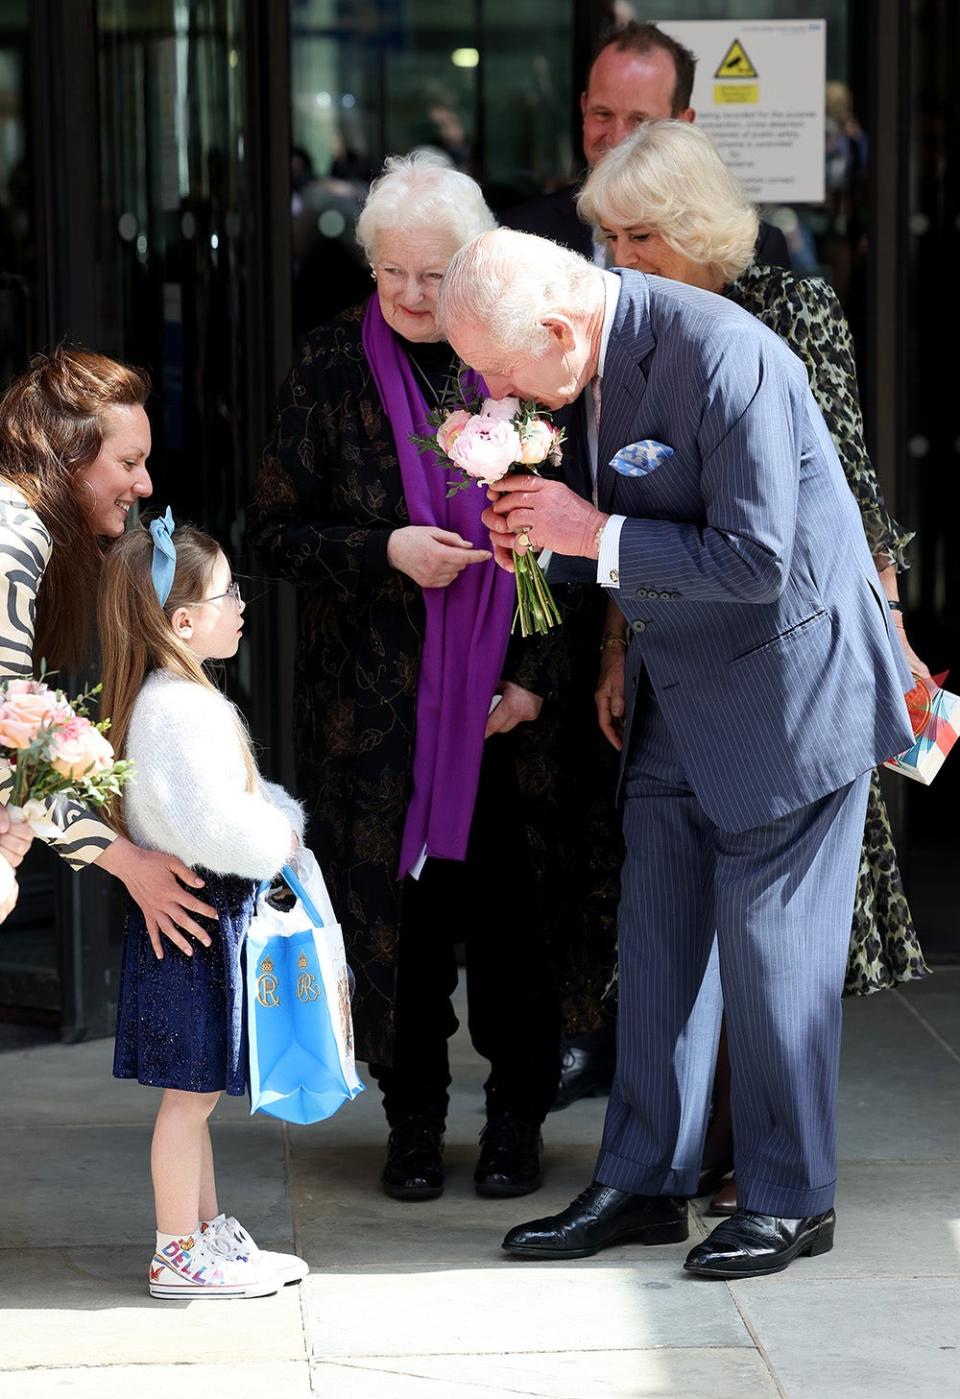 King Charles smelling flowers given to him by a little girl